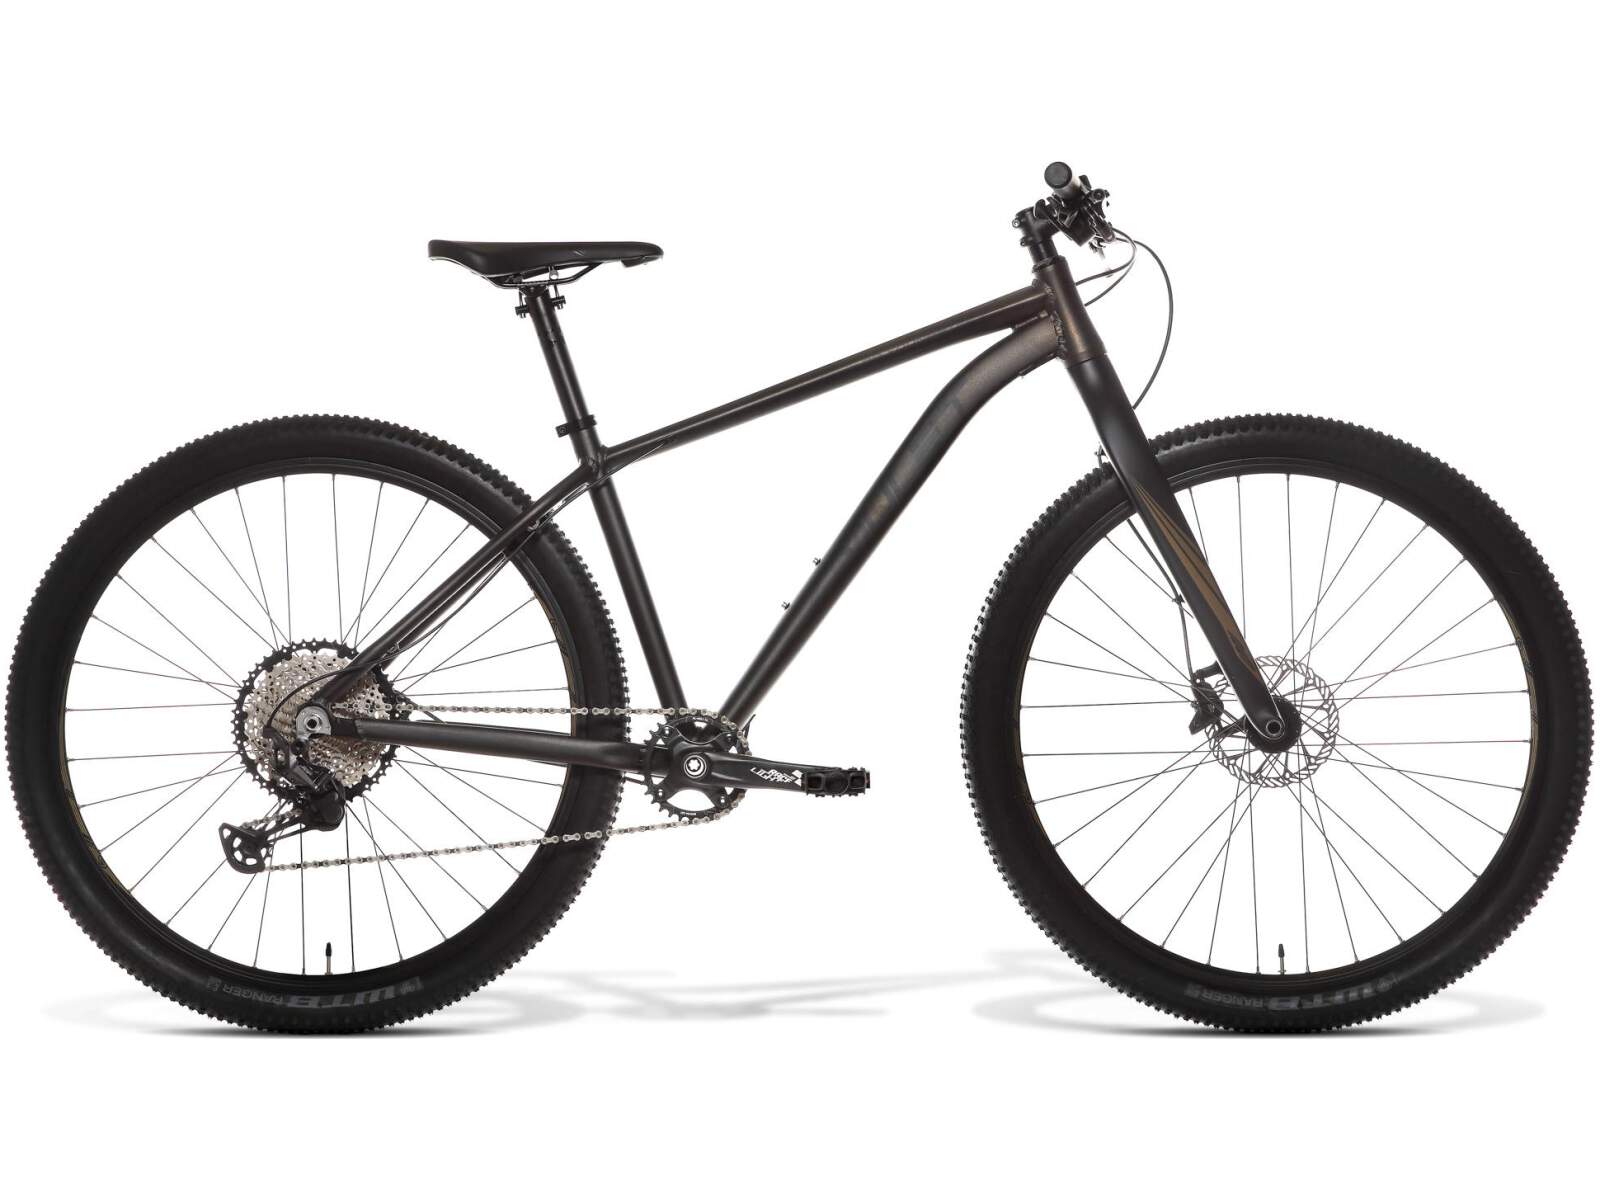 Amulet MTB 29 youngster carbon 1.12